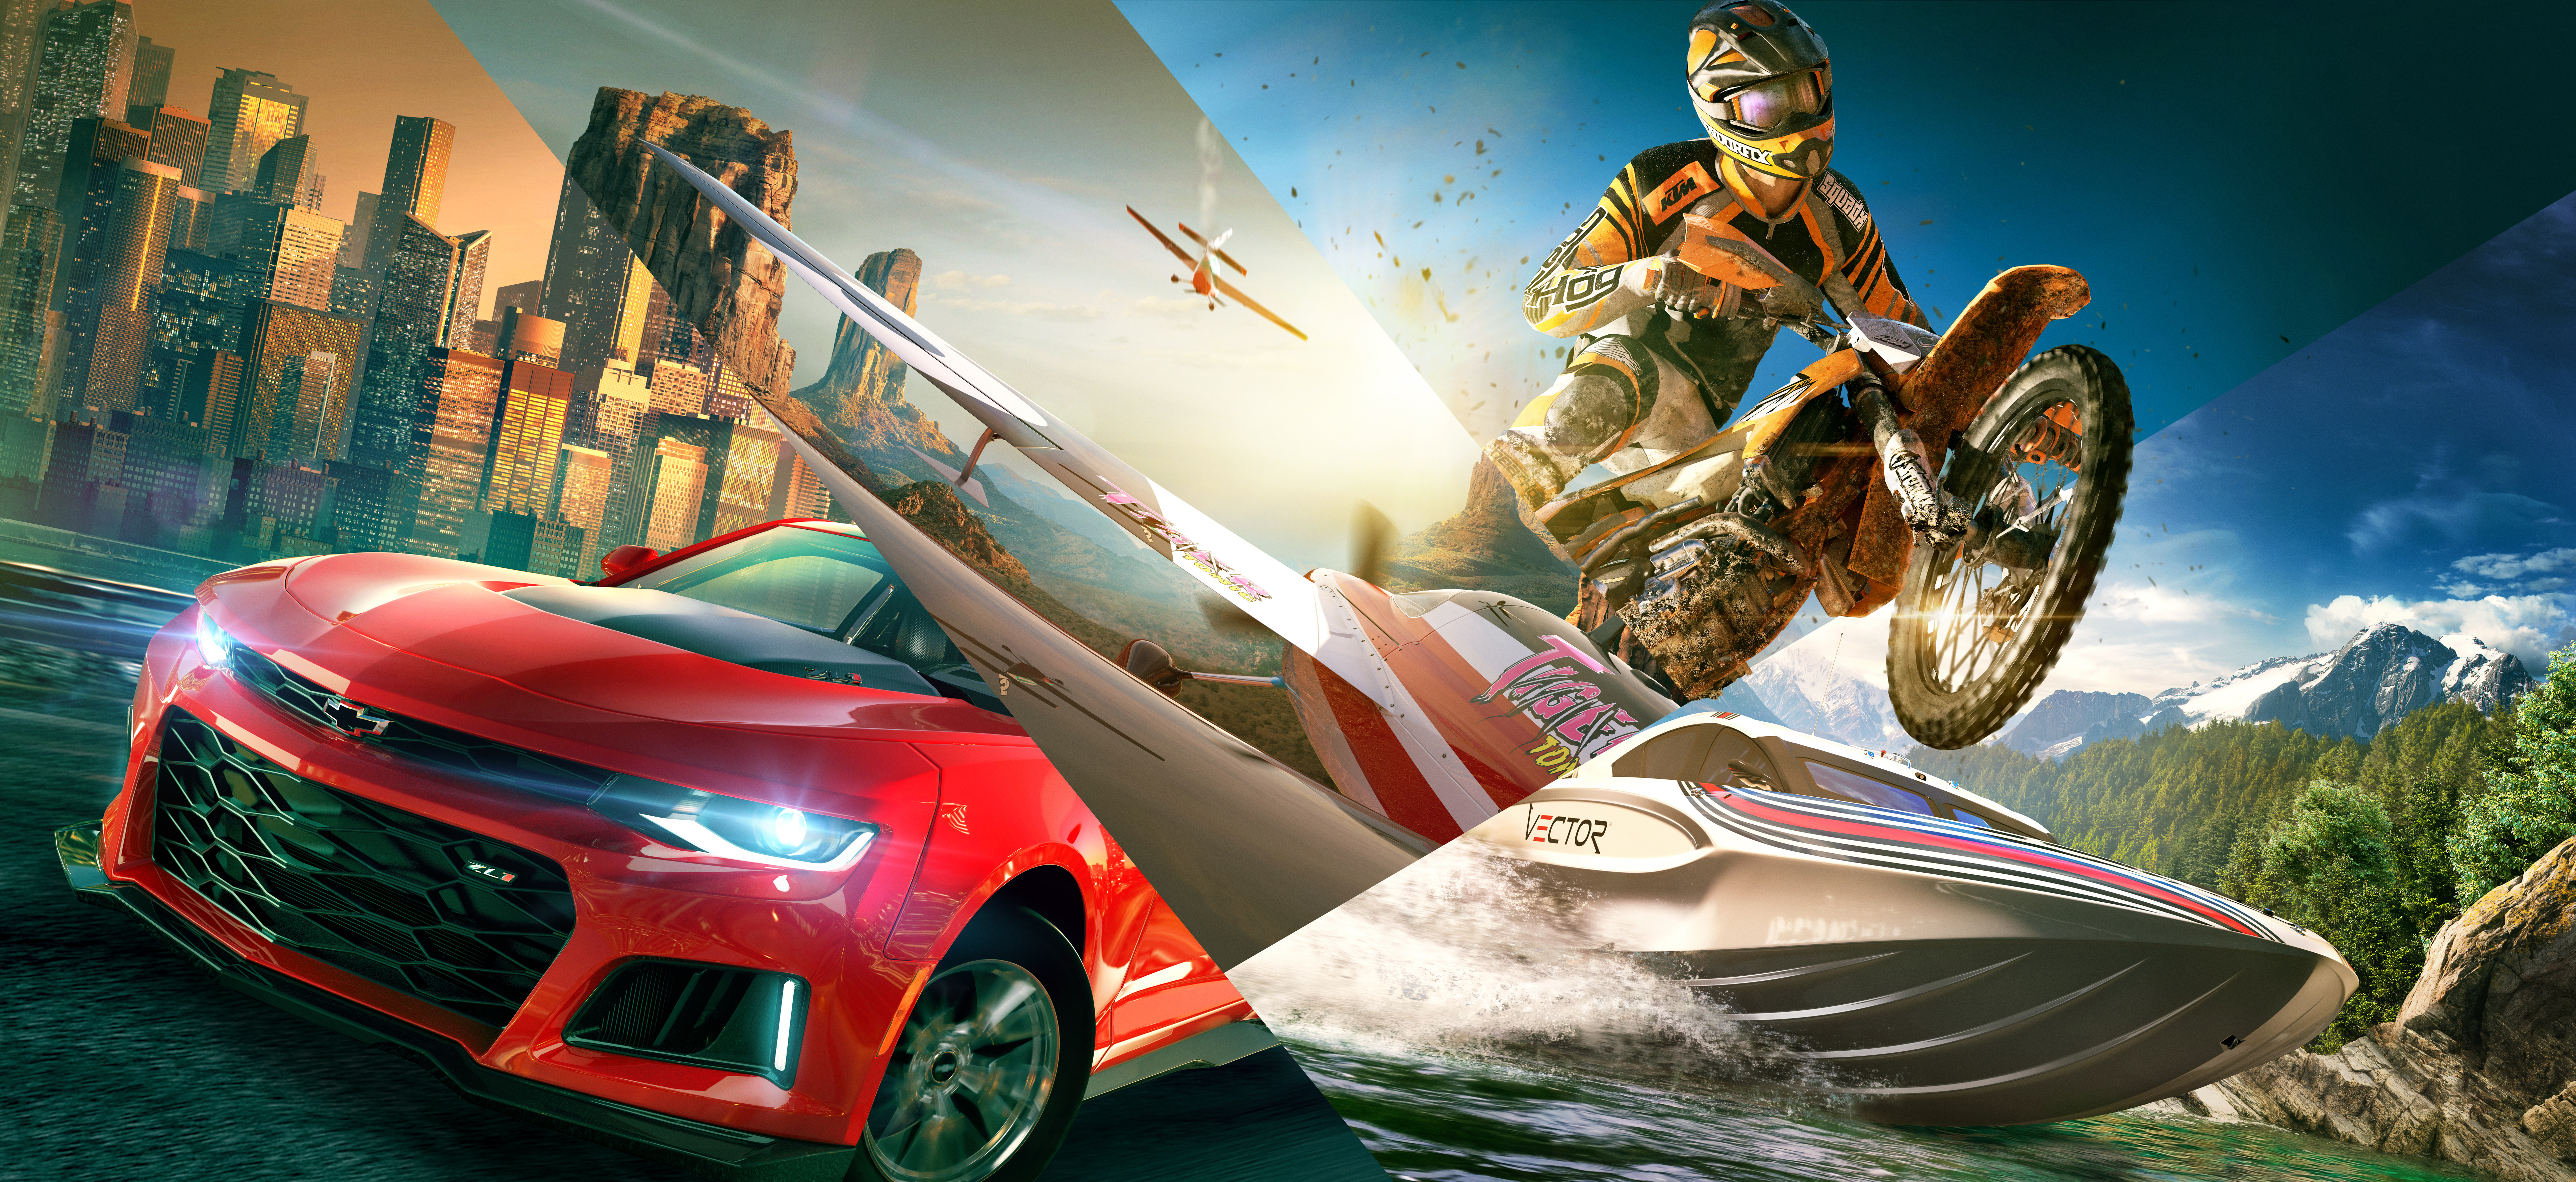 Video Game The Crew 2 7627x3500